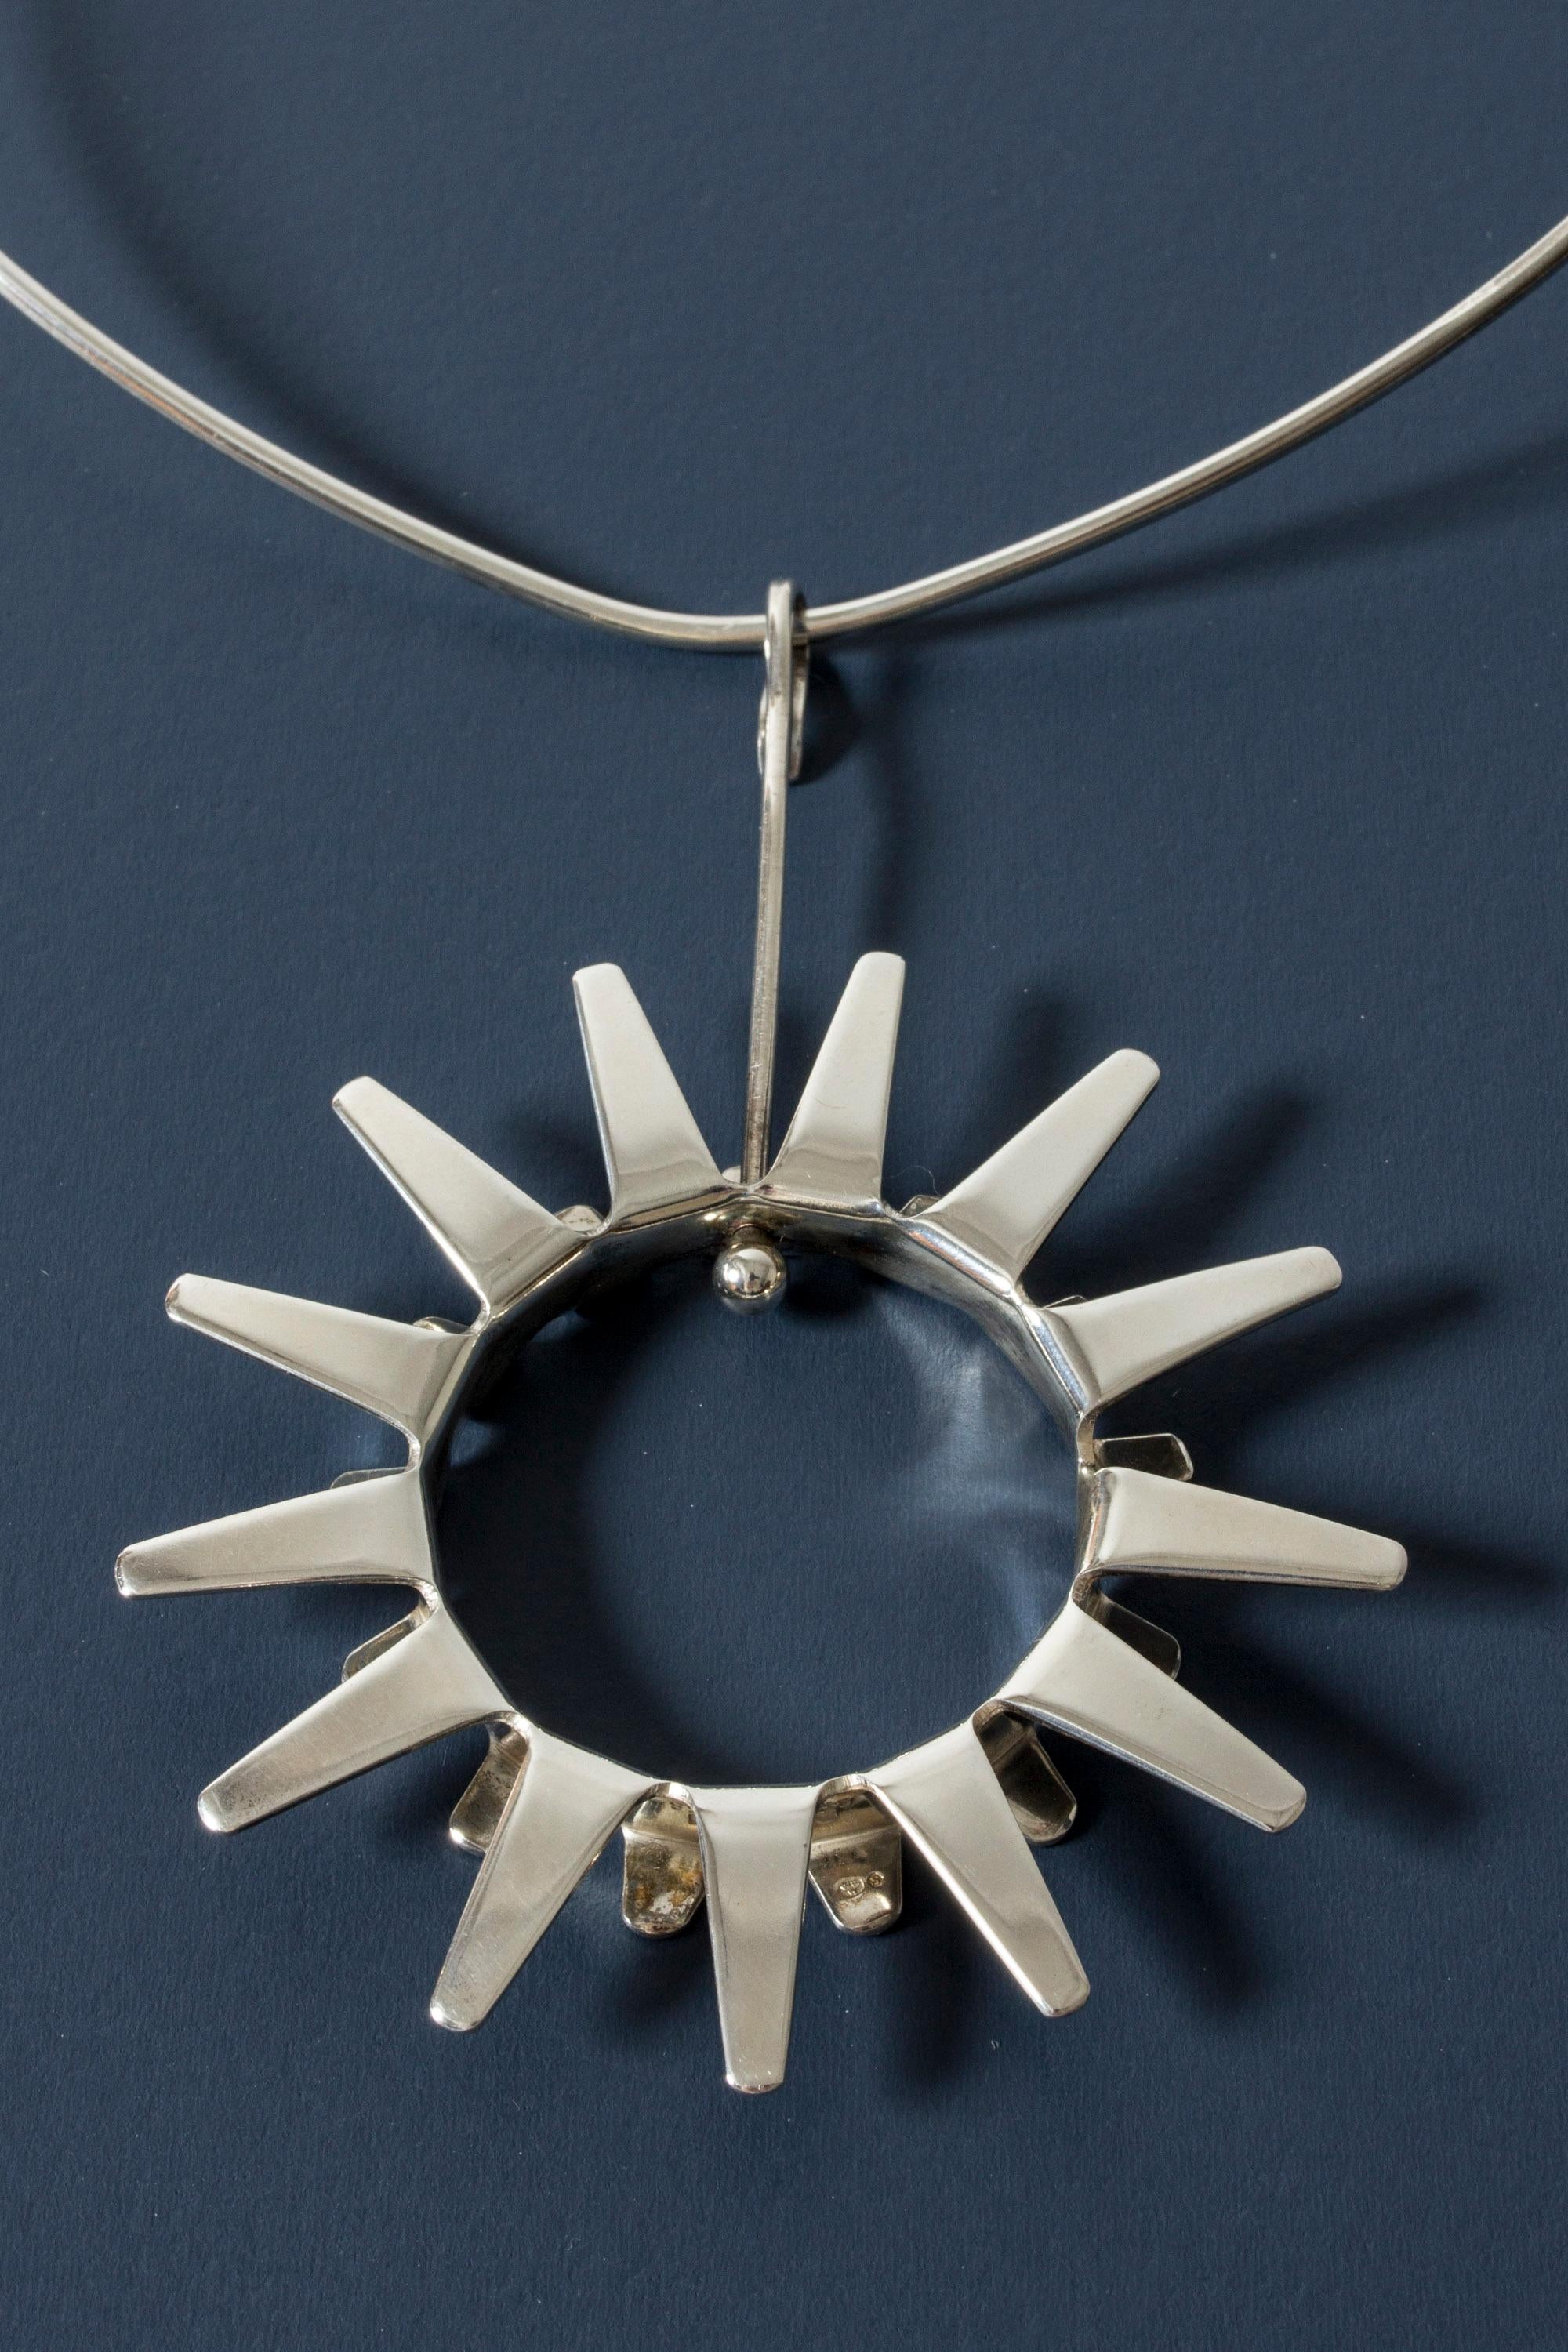 Amazing silver neckring by Tone Vigeland, with a large stylized pendant in the form of a sun. Vivacious and graphic, a very expressive design.

Dimensions: Inner width of neckring 13.2 cm, height pendant 9.2 cm, width of pendant 6.5 cm